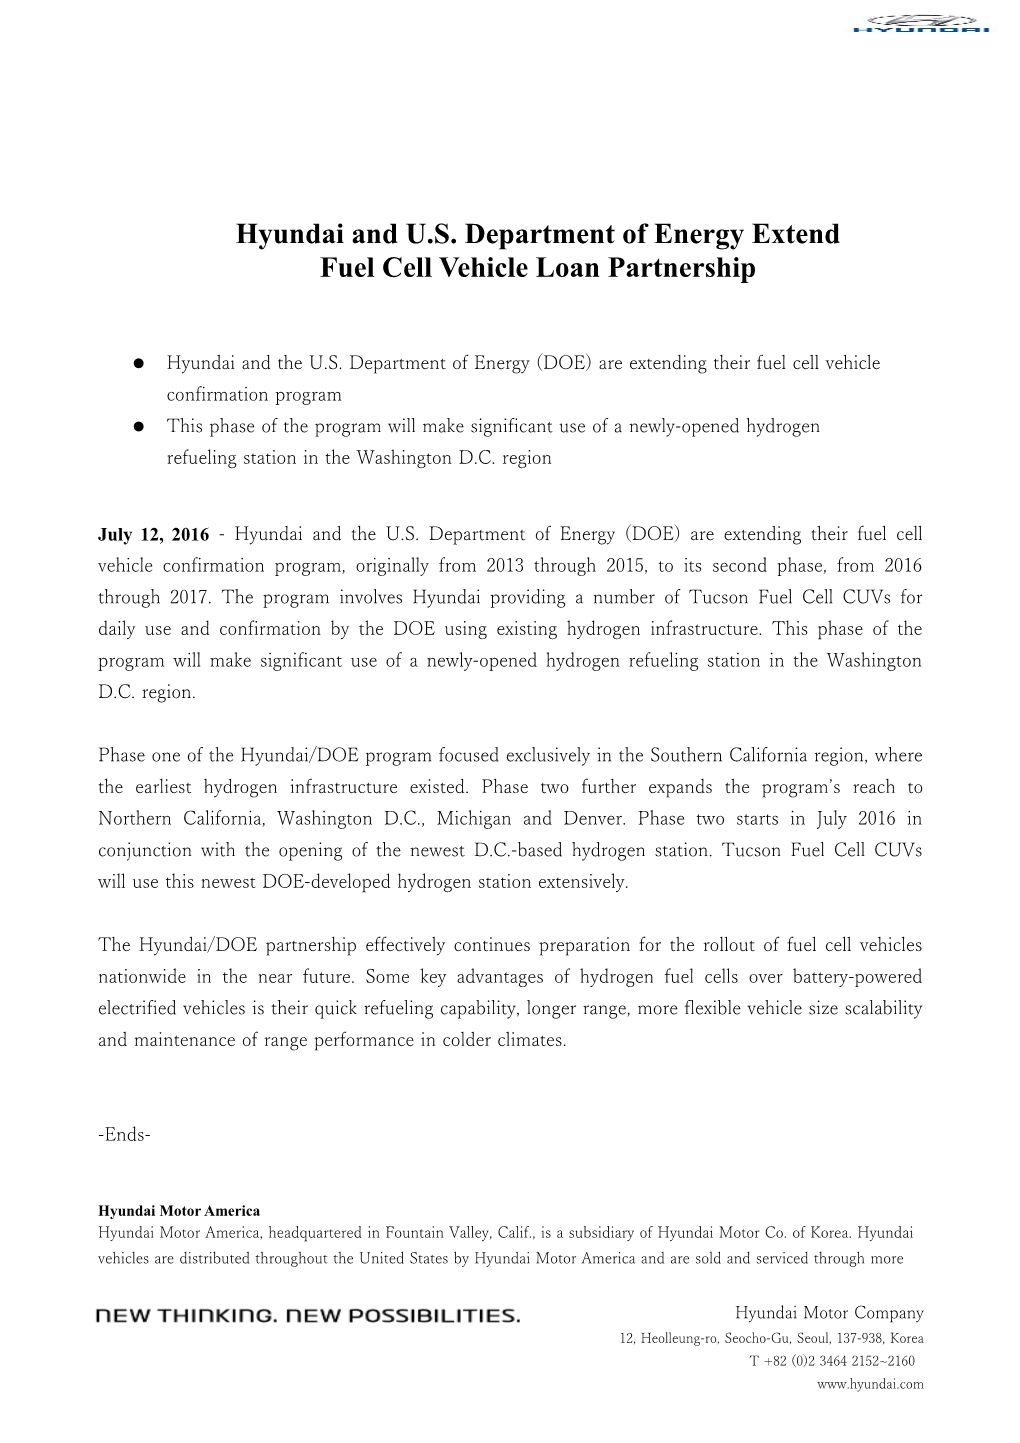 Hyundai and U.S. Department of Energy Extend